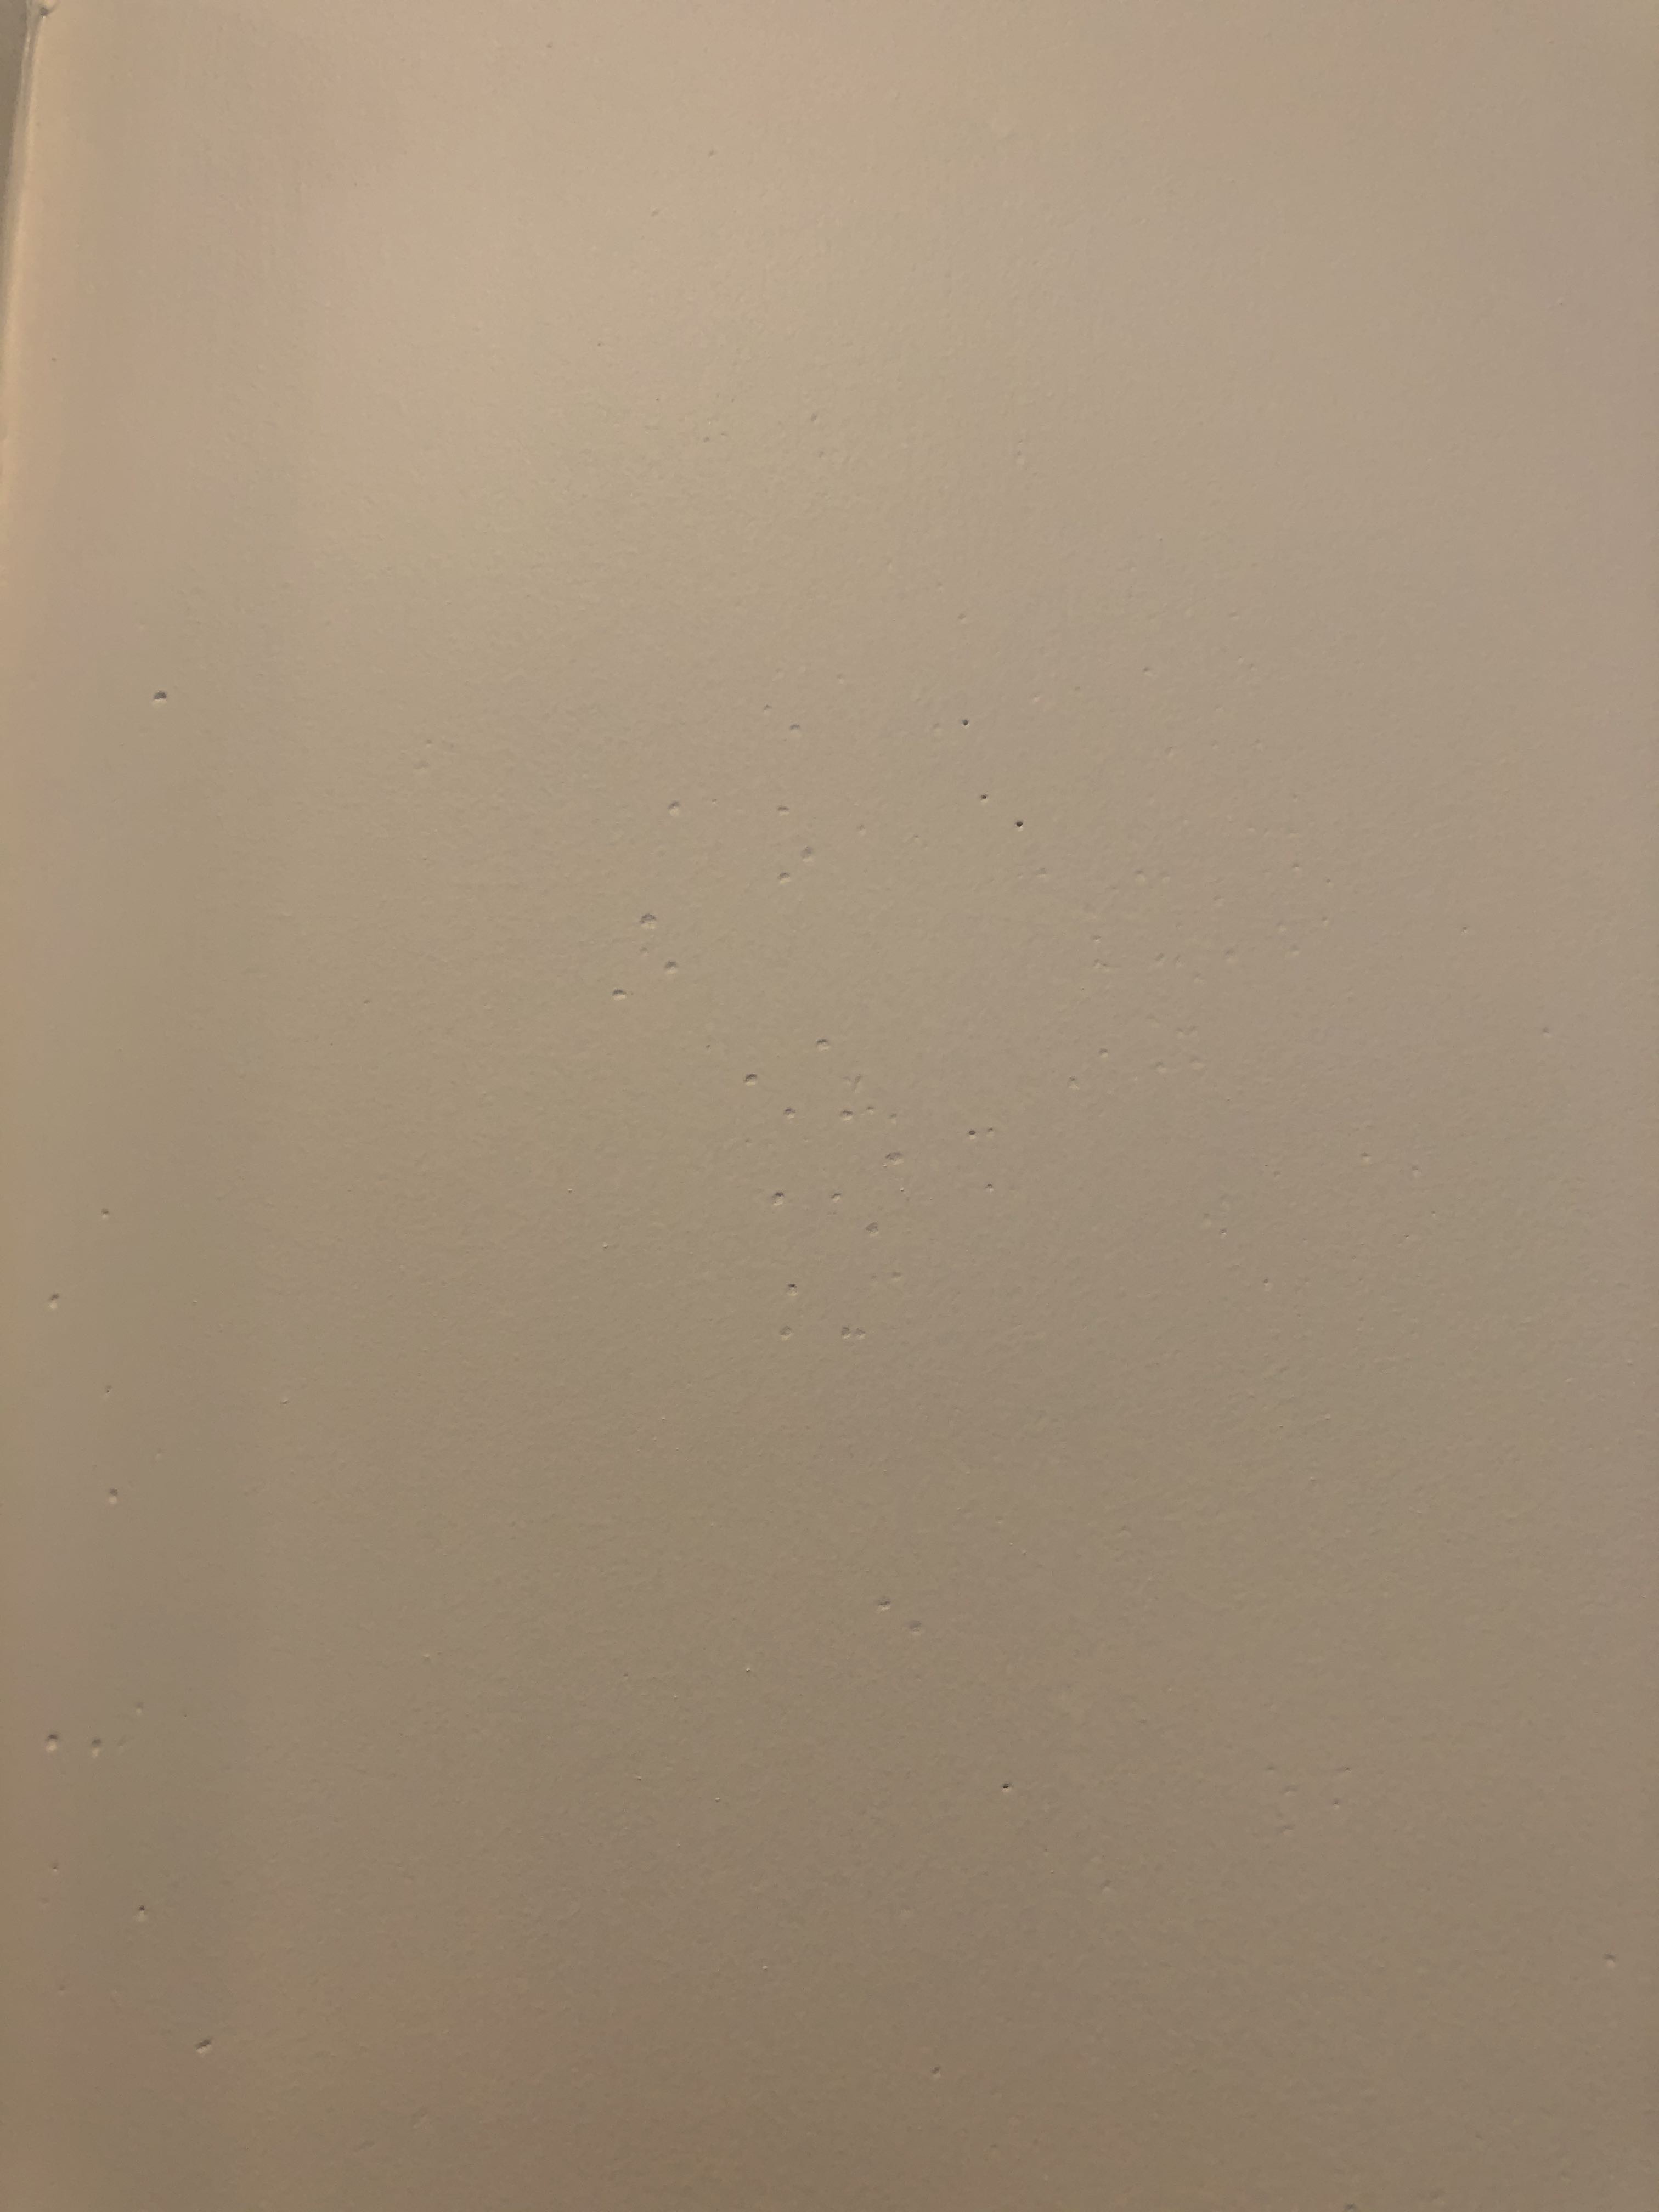 holes in wall